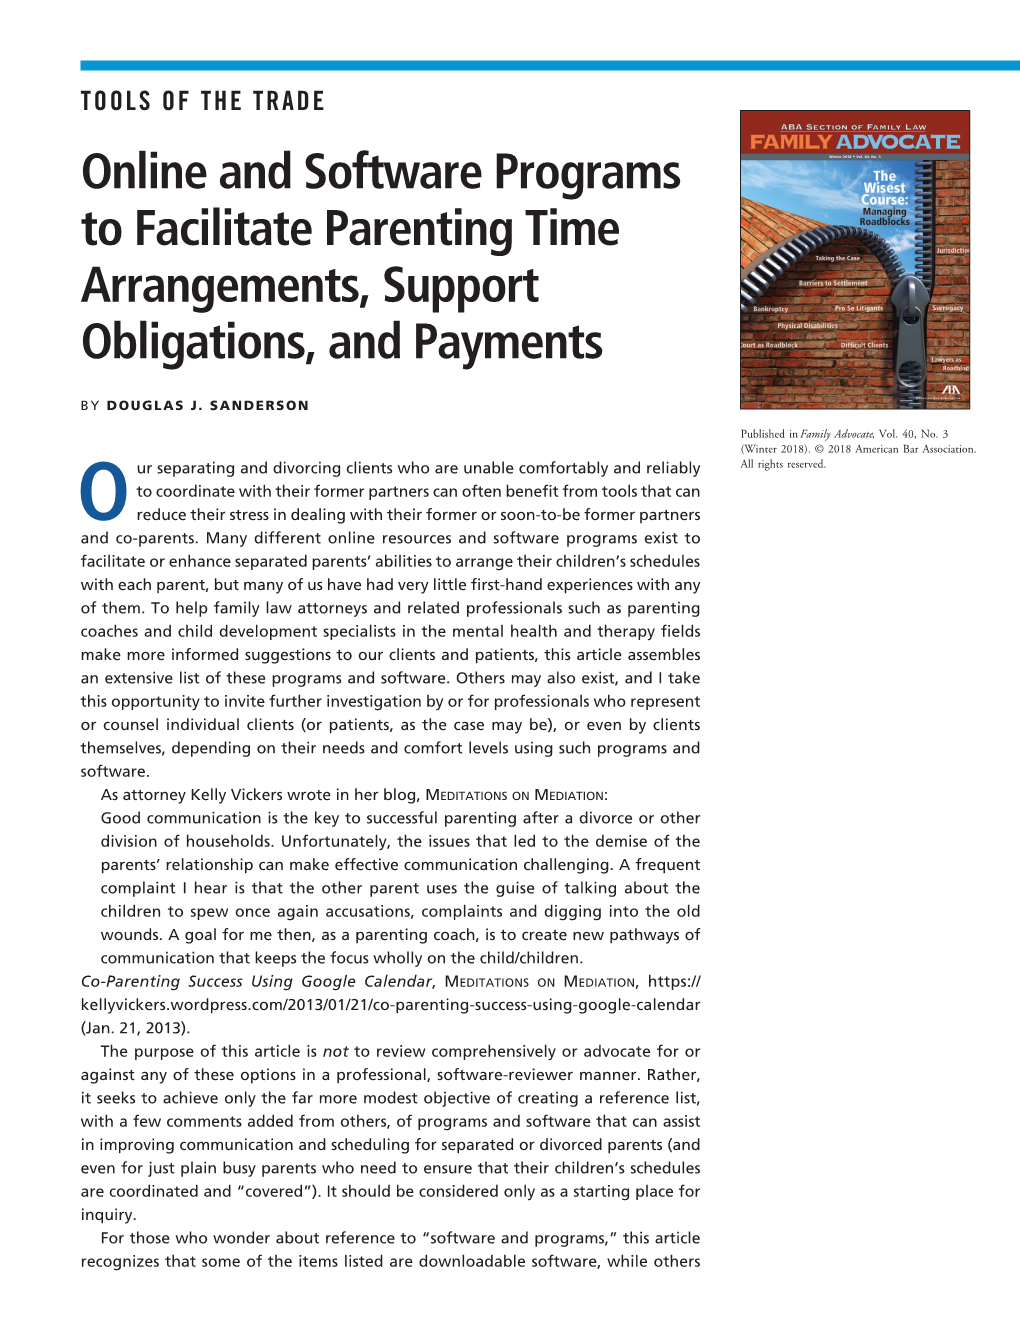 Online and Software Programs to Facilitate Parenting Time Arrangements, Support Obligations, and Payments